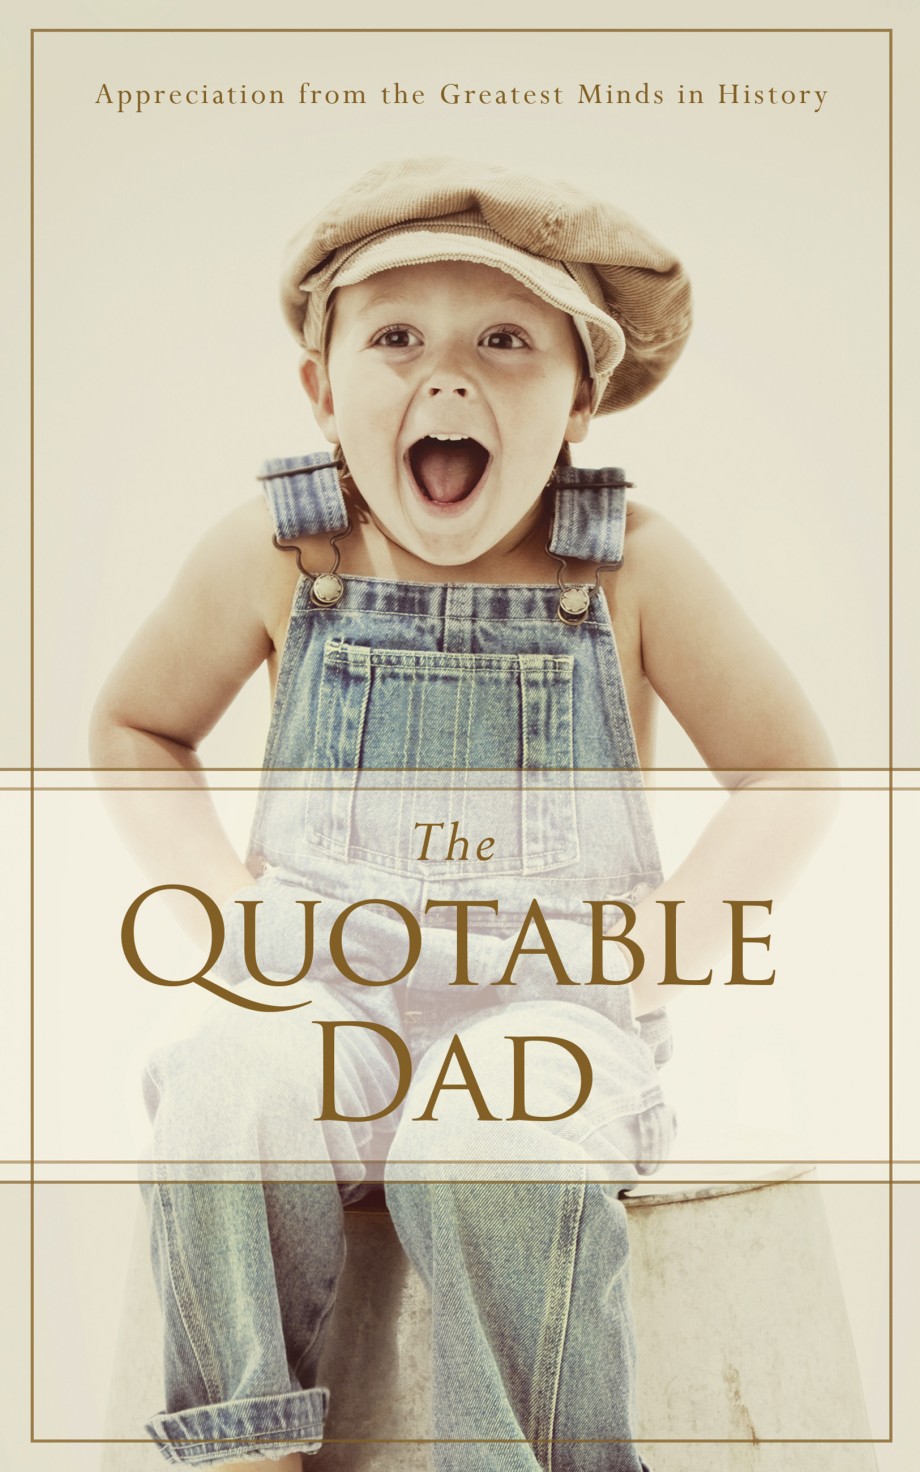 Quotable Dad Appreciation from the Greatest Minds in History